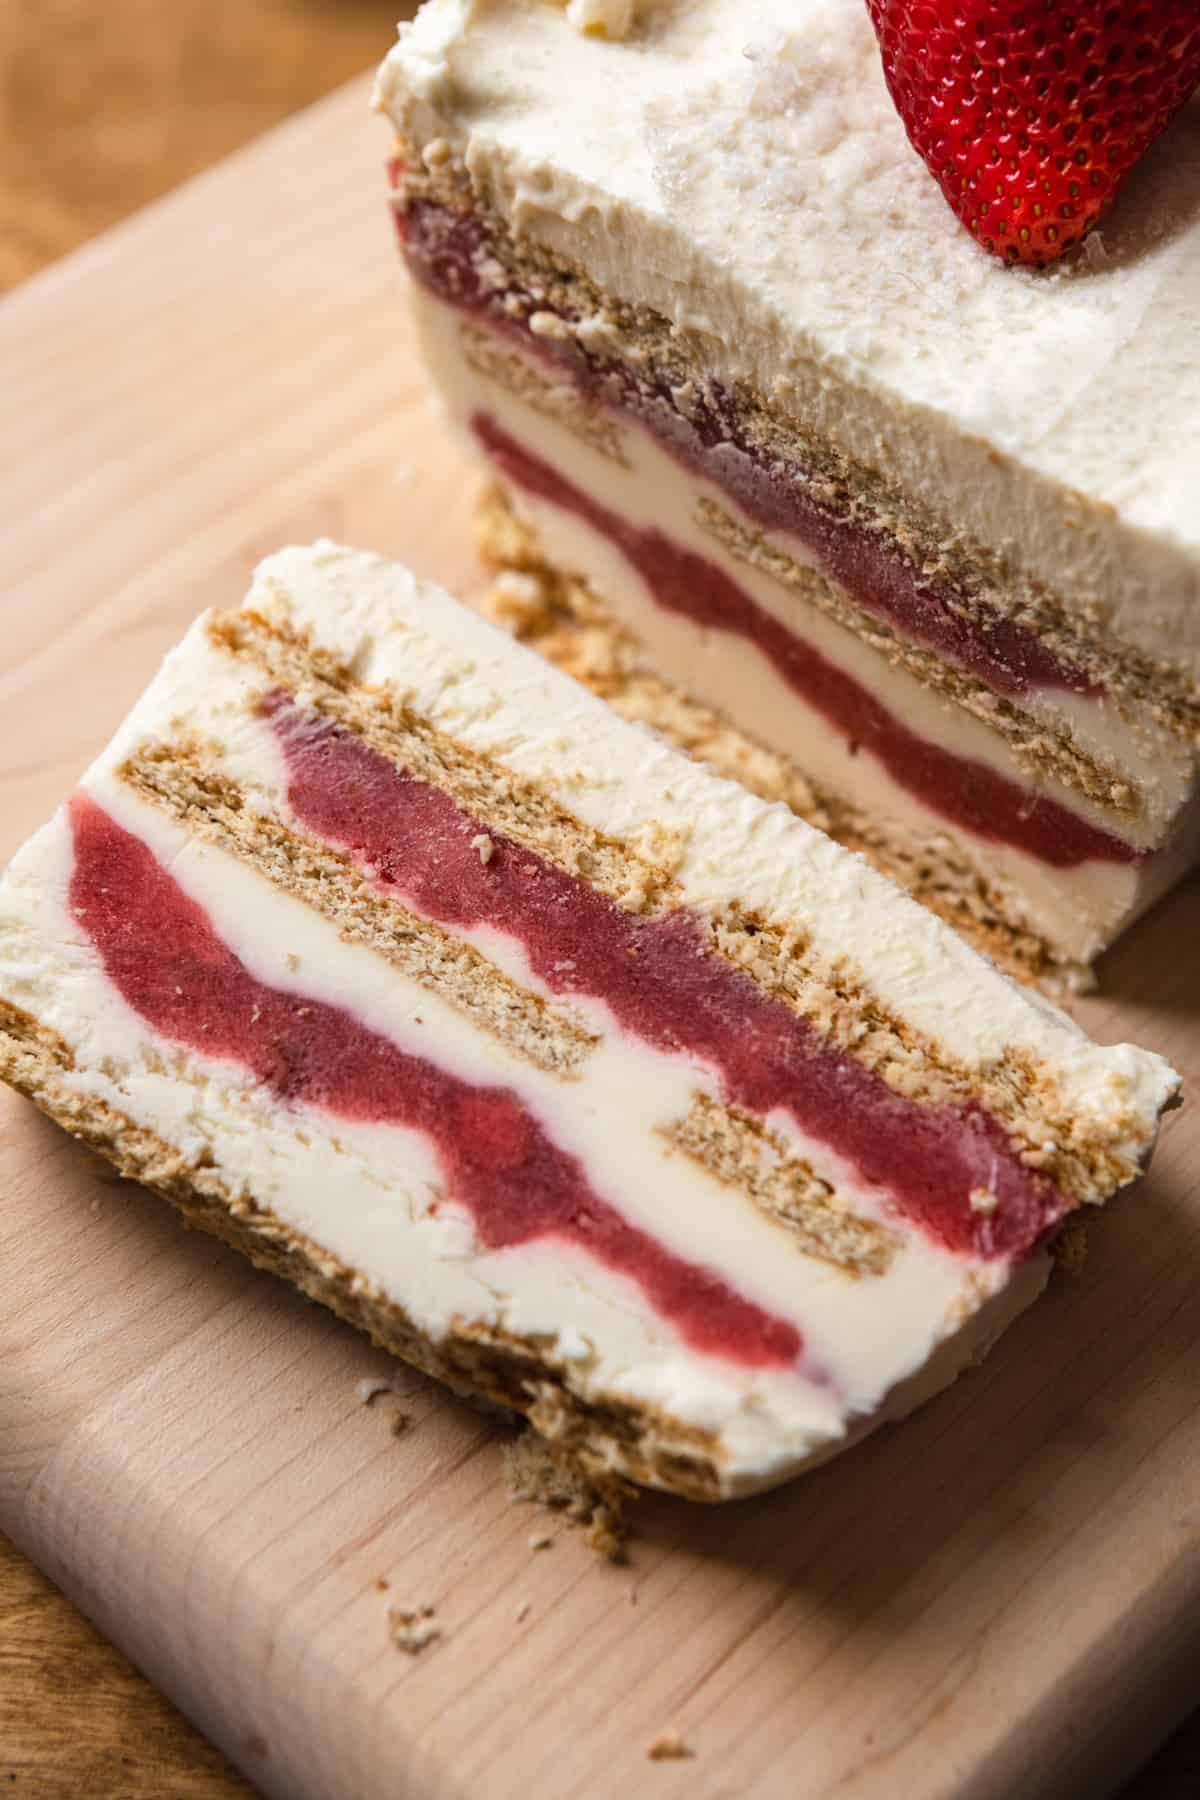 Strawberry cream cheese icebox cake sliced on a wood serving board.